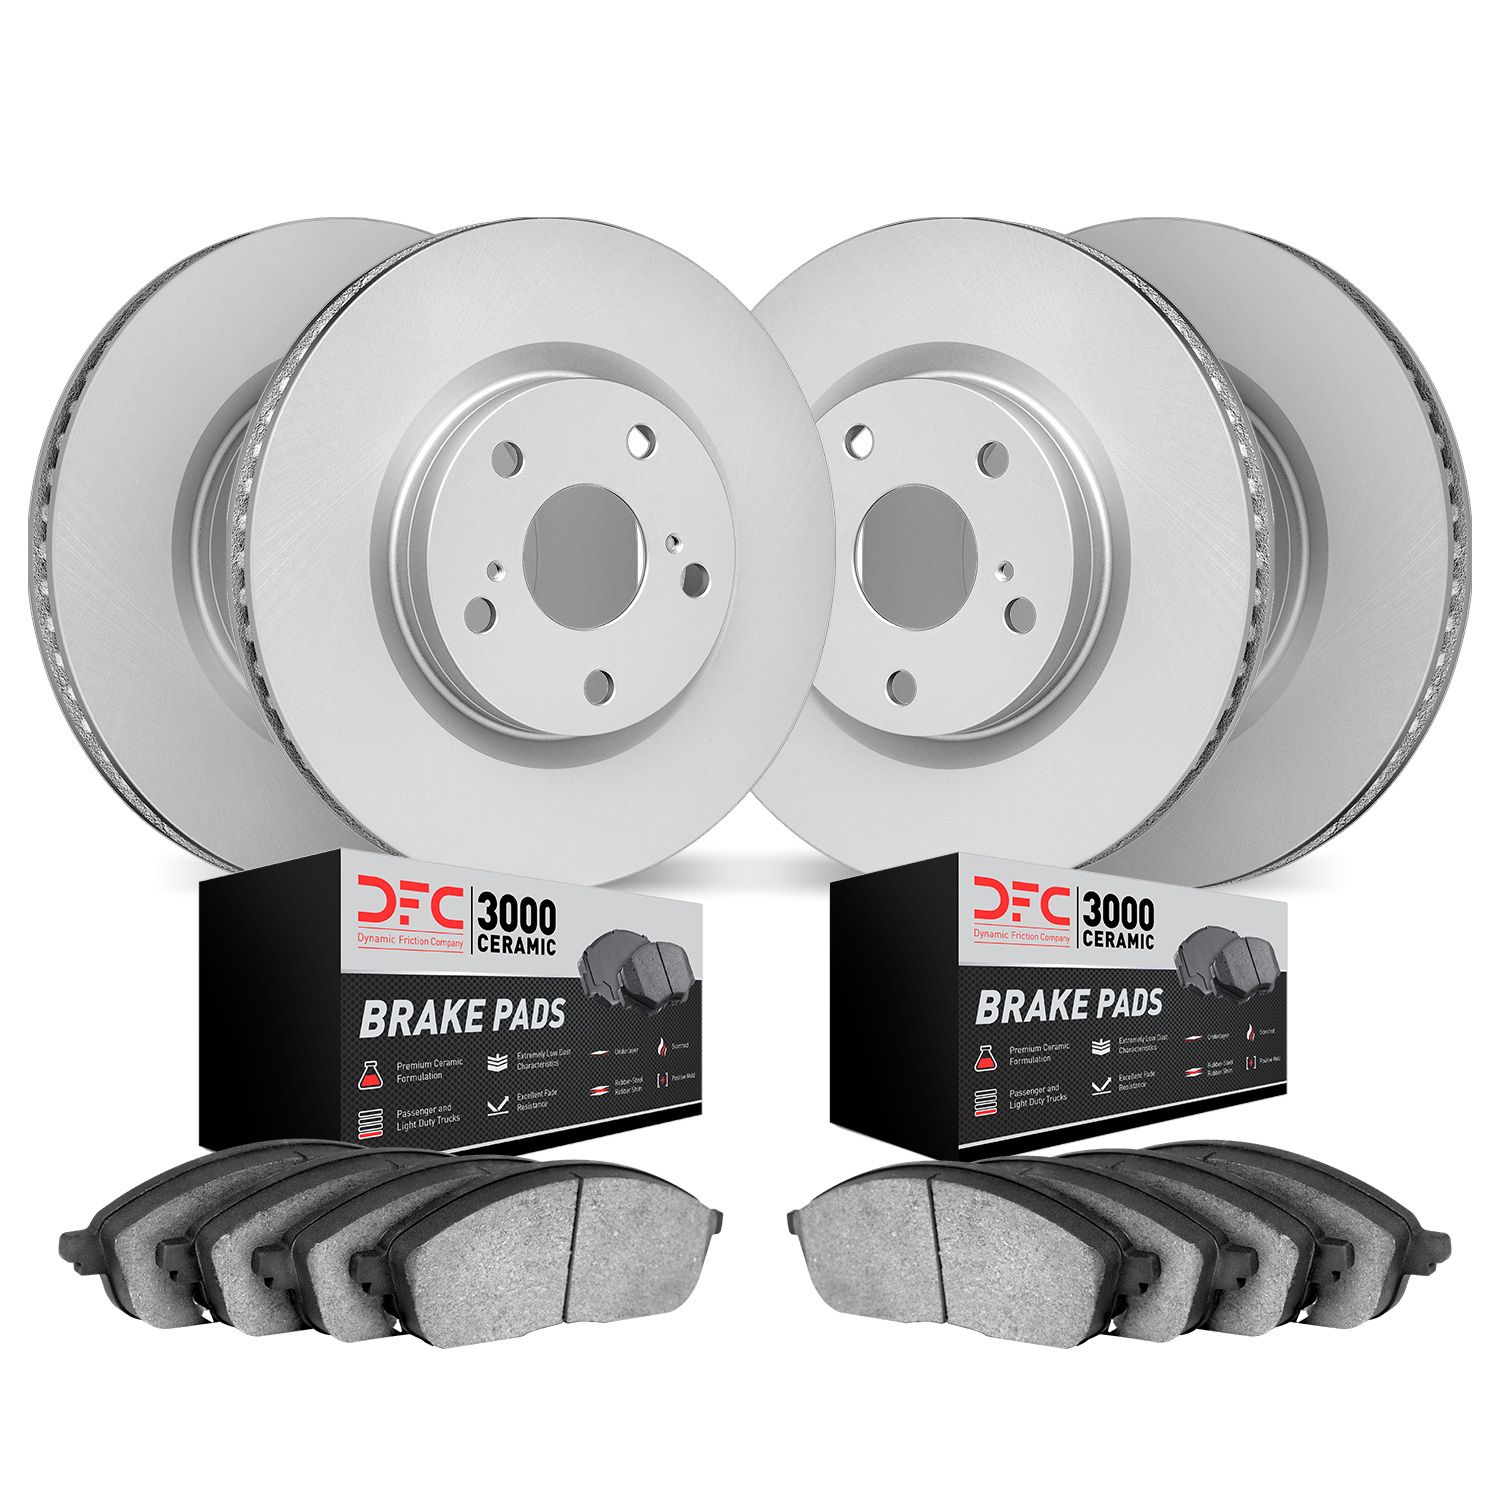 4304-31075 Geospec Brake Rotors with 3000-Series Ceramic Brake Pads Kit, Fits Select BMW, Position: Front and Rear